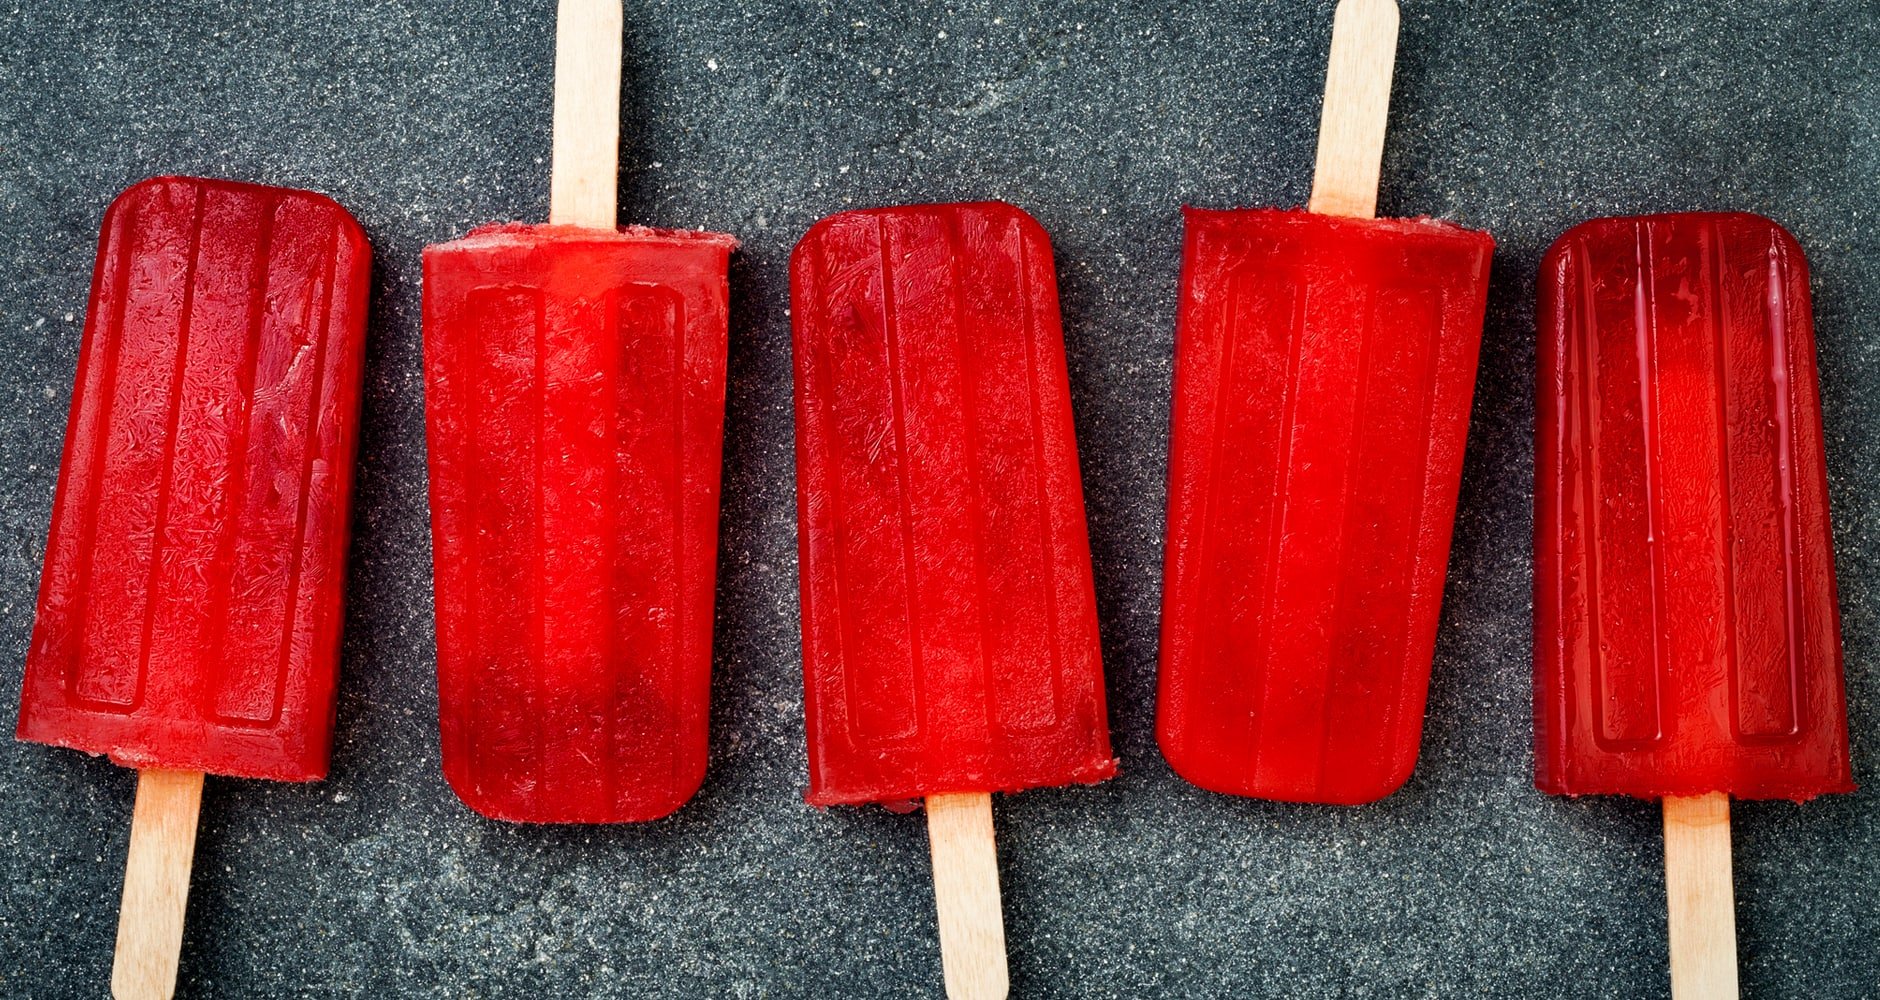 red Ice pops laid out in a row